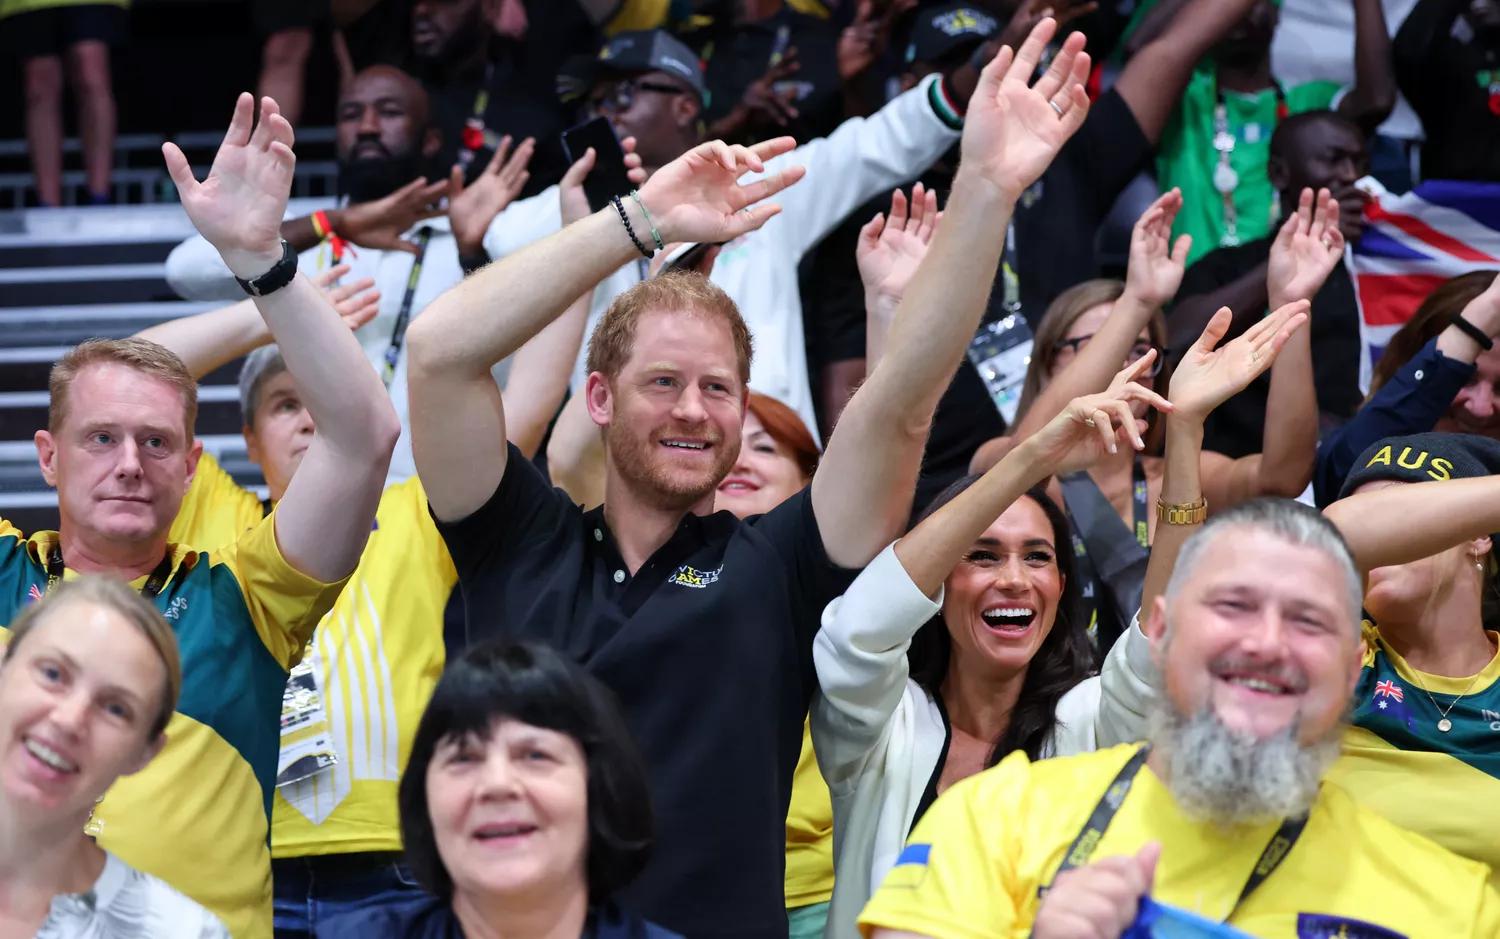 Meghan Markle's Missing Ring at Invictus Games Sparks Buzz: Inside the Royal Mystery